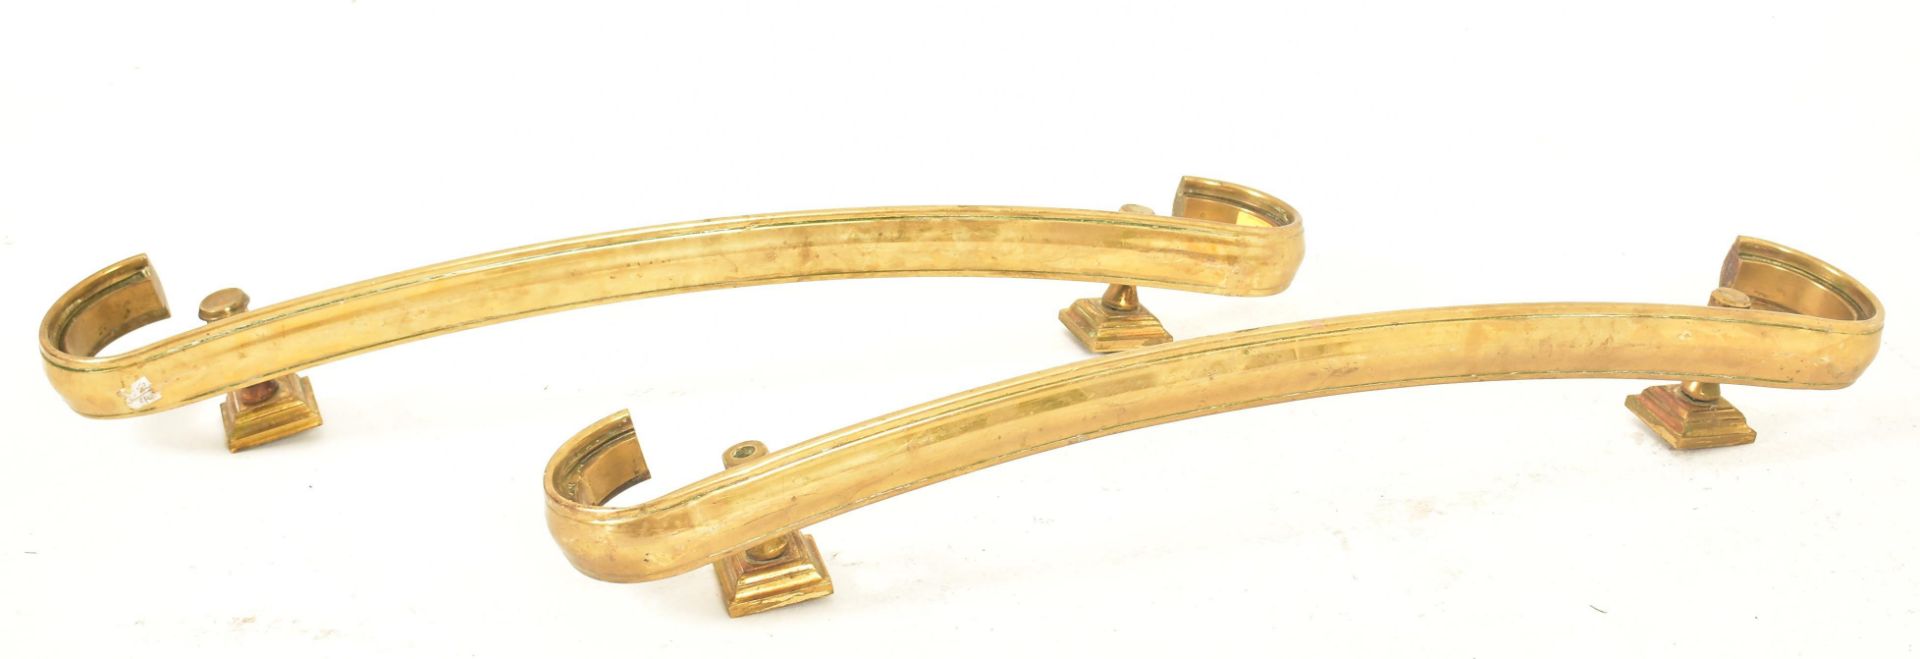 PAIR OF EARLY 20TH CENTURY BRASS THEATRE HANDRAILS